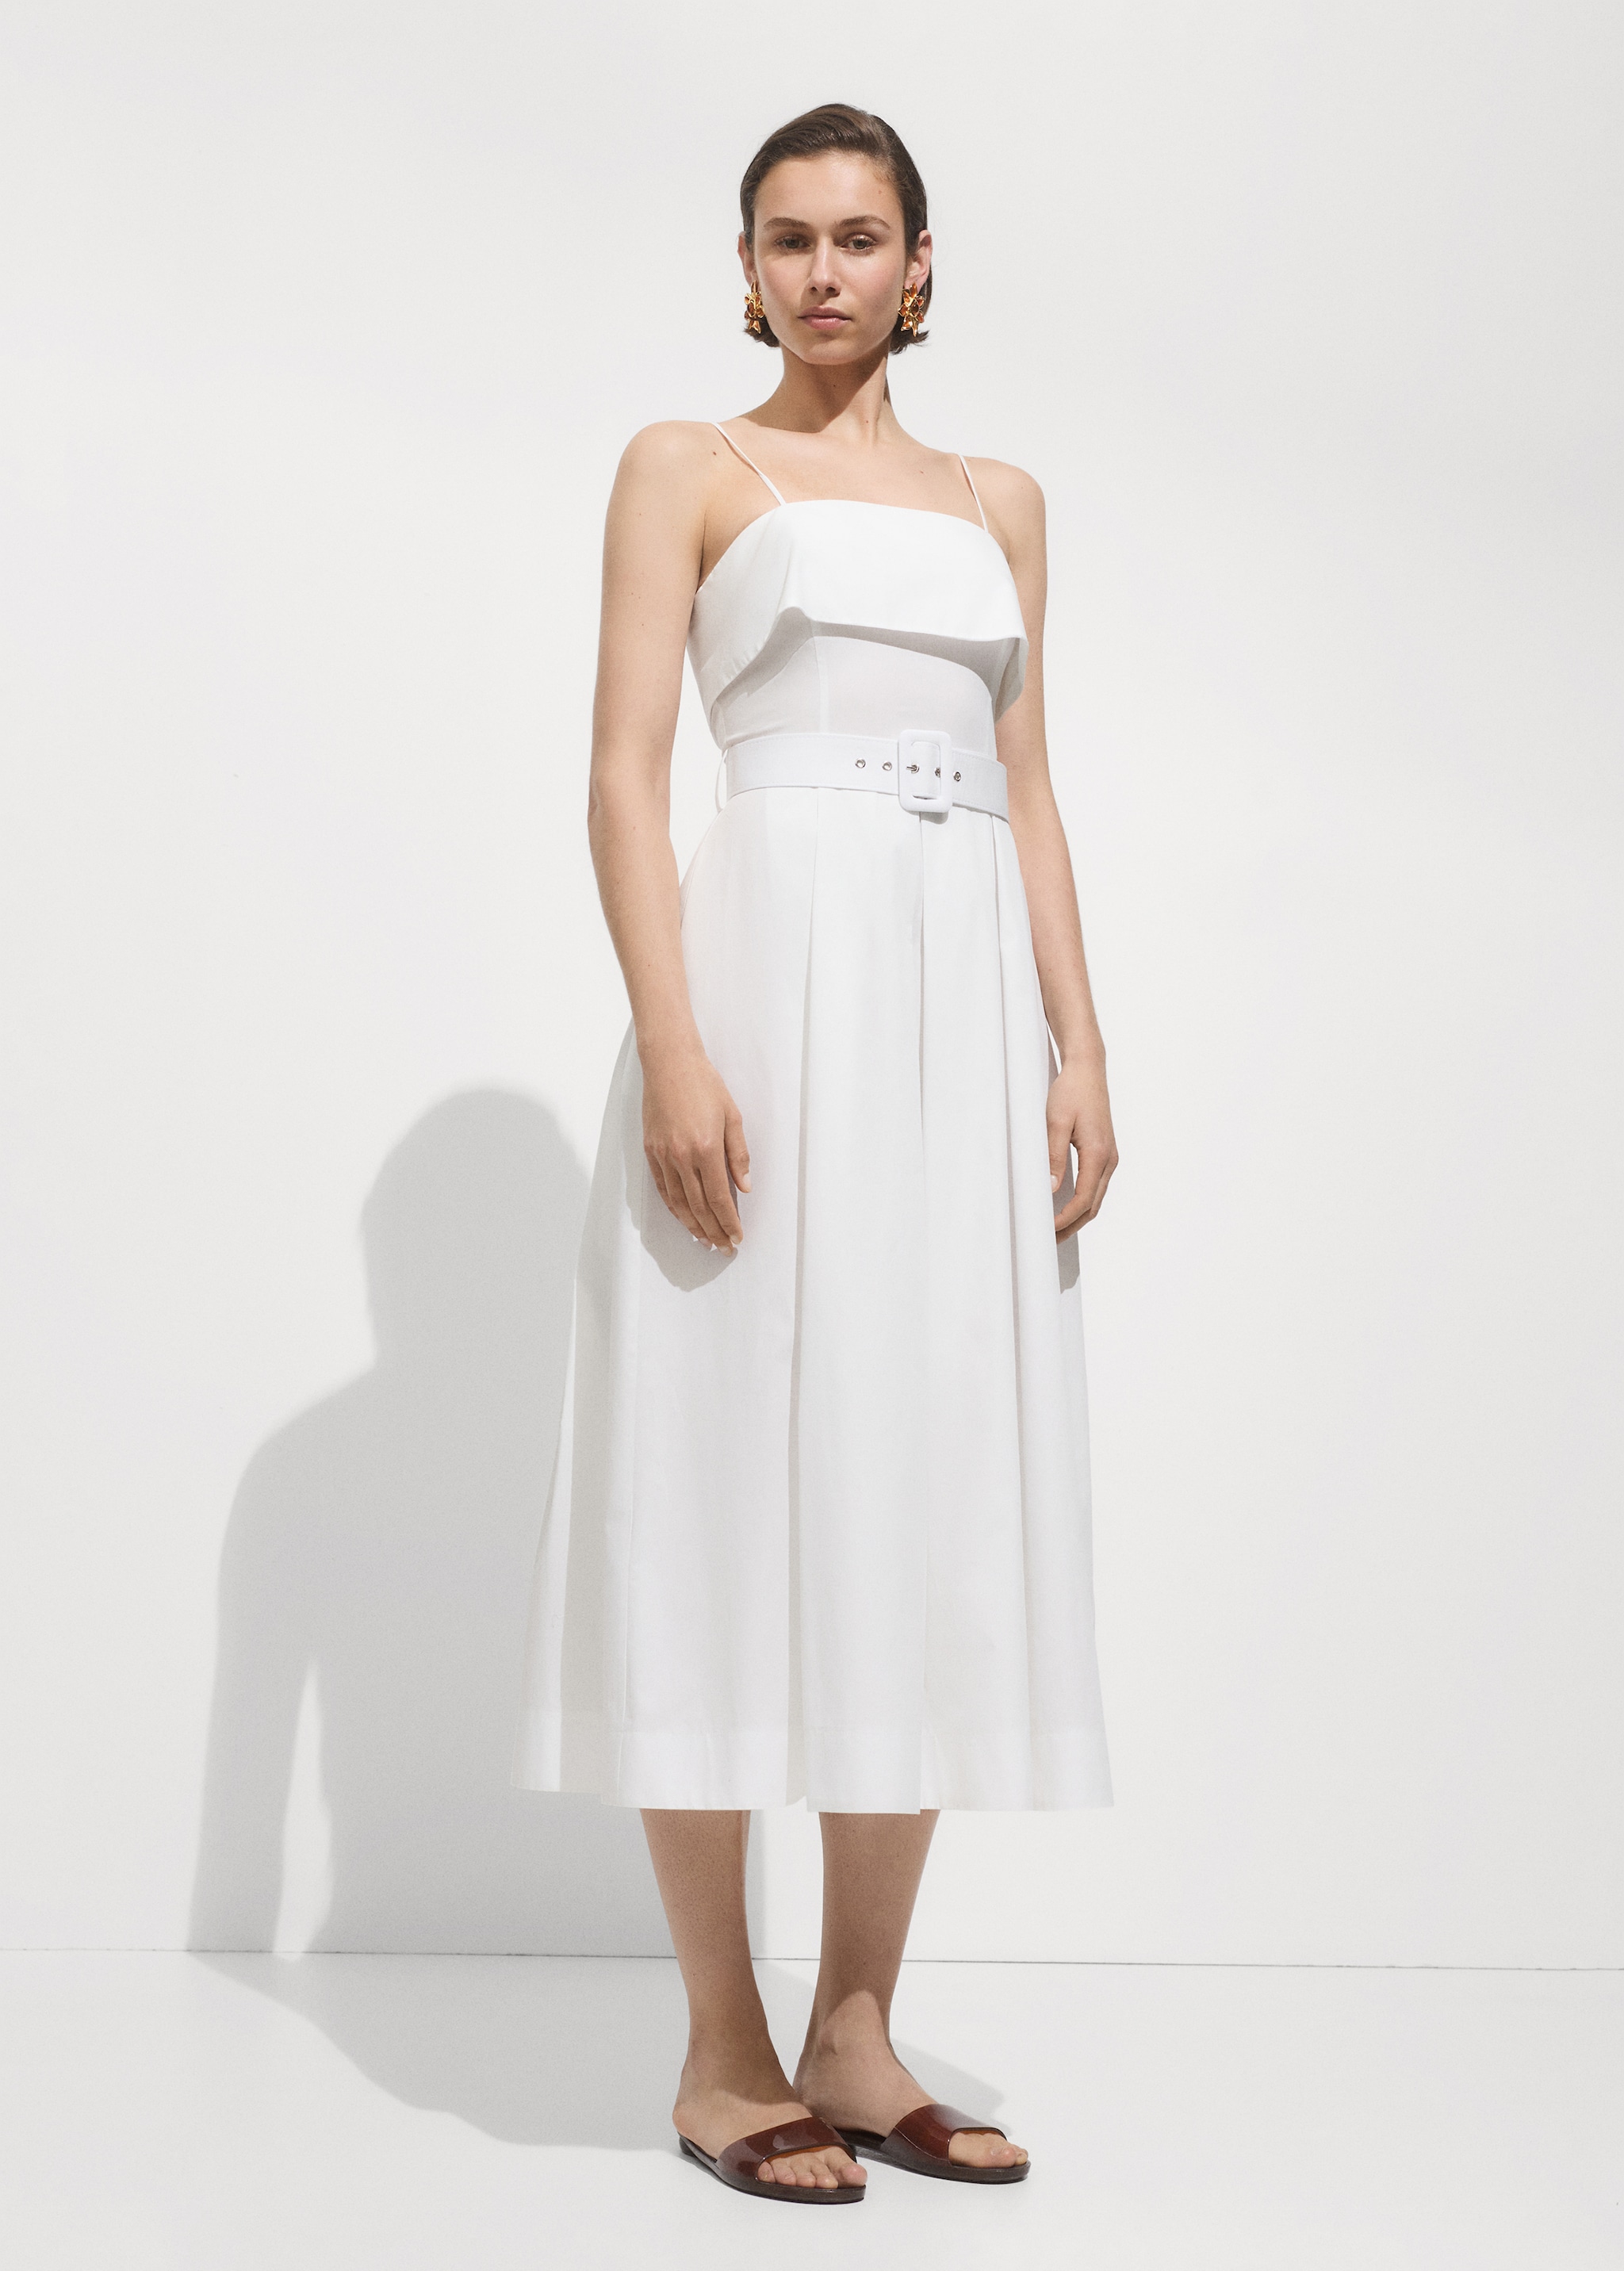 Dress with a belted neckline - General plane